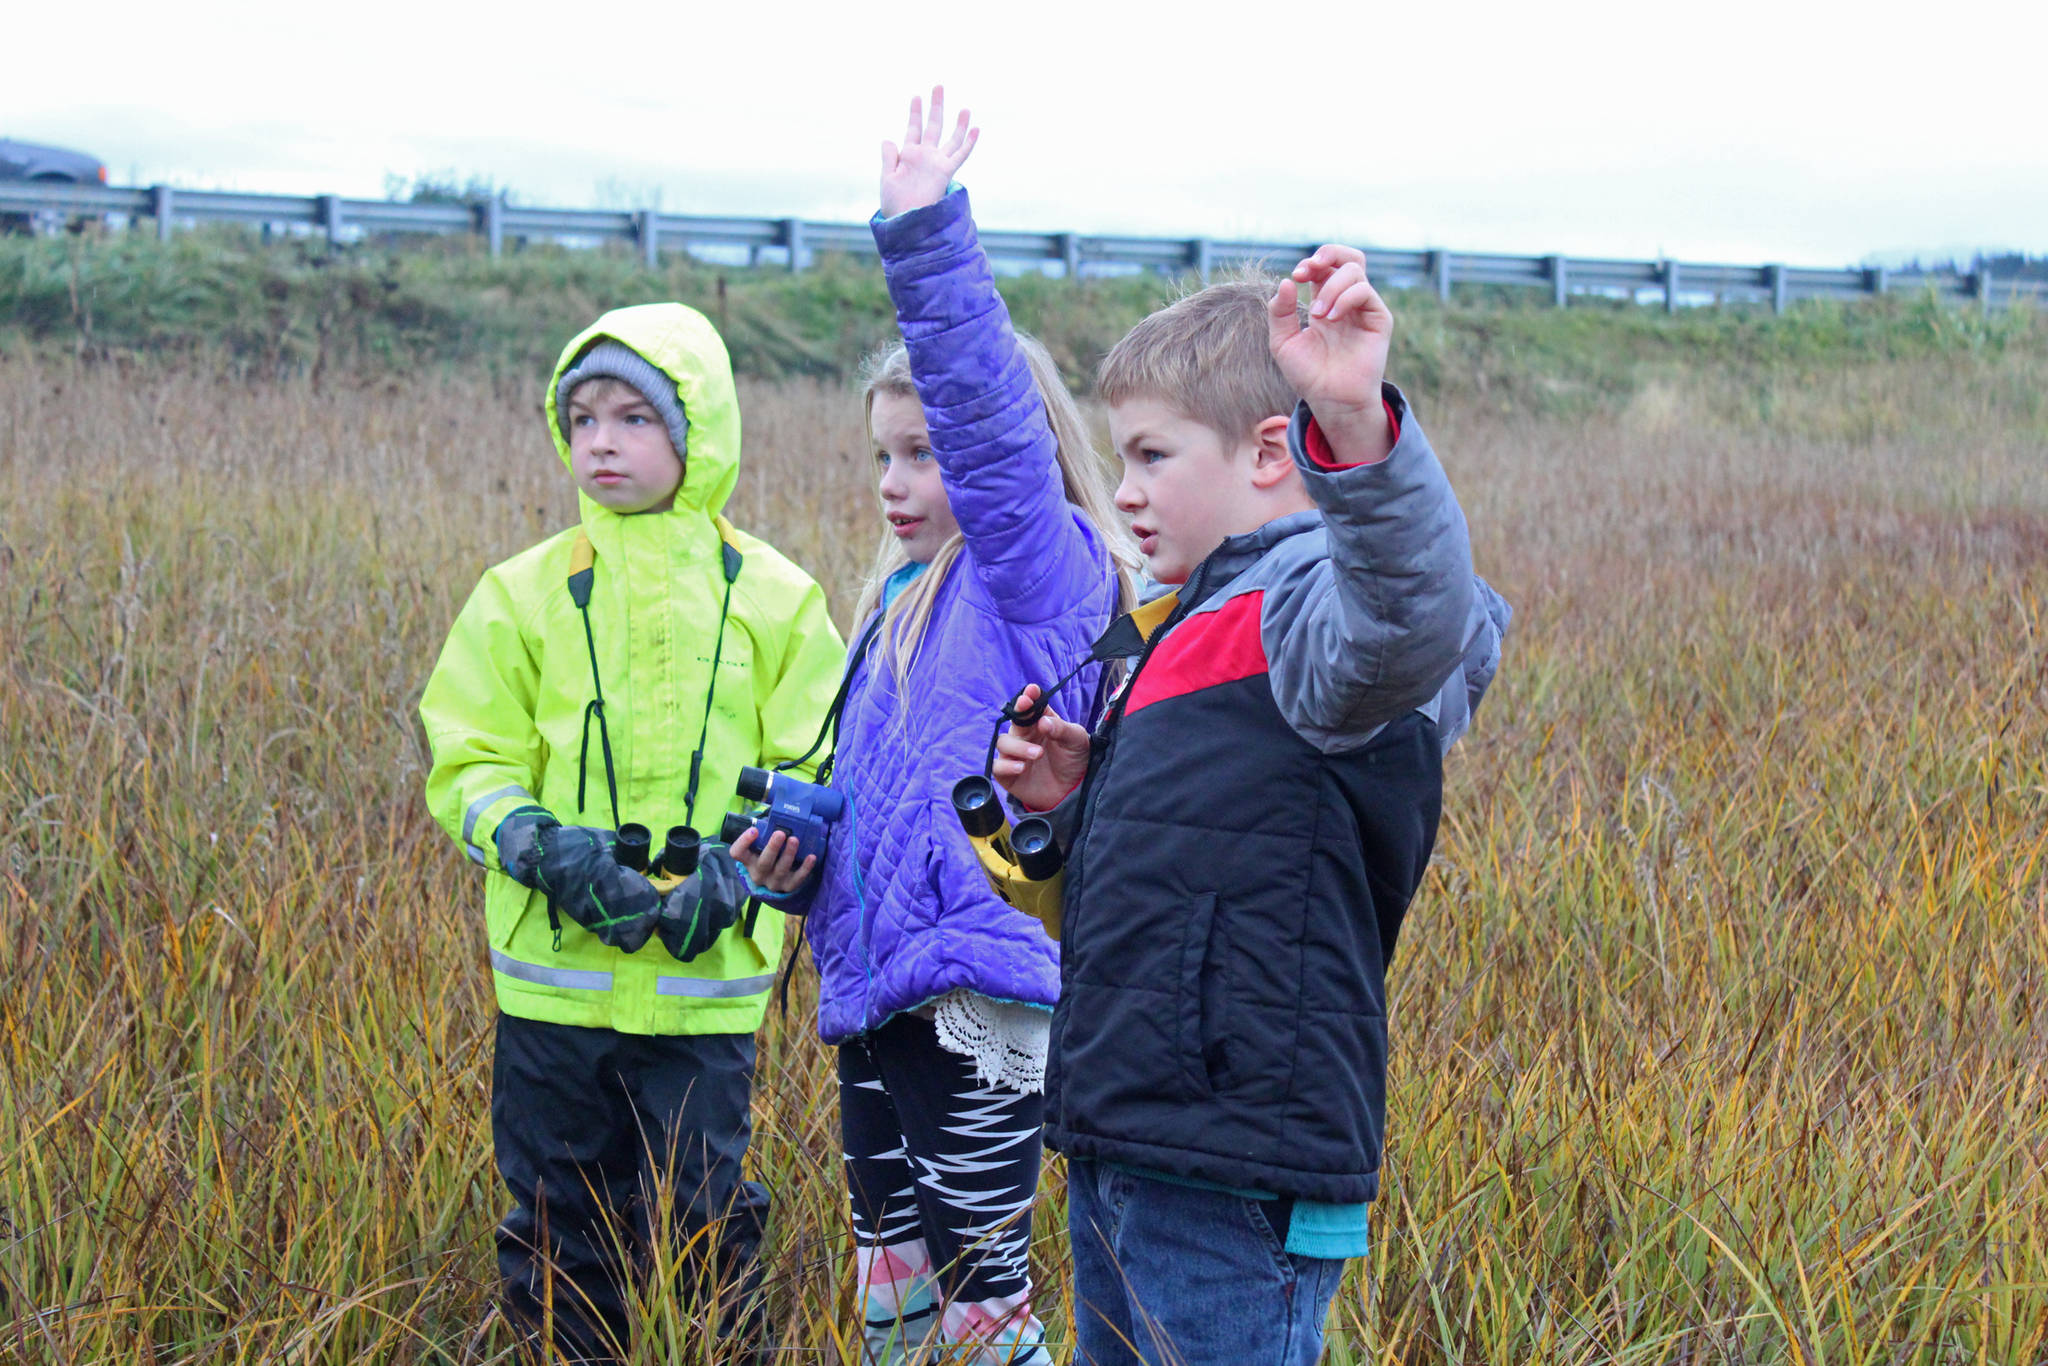 Paul Banks Elementary students Gabe Stanislaw (left), Tatum Kirtley (center) and Isaiah Mann (right) raise their hands to answer a questions during a field trip to the Beluga Slough on Thursday, Sept. 28, 2017 in Homer, Alaska. (Photo by Megan Pacer/Homer News)